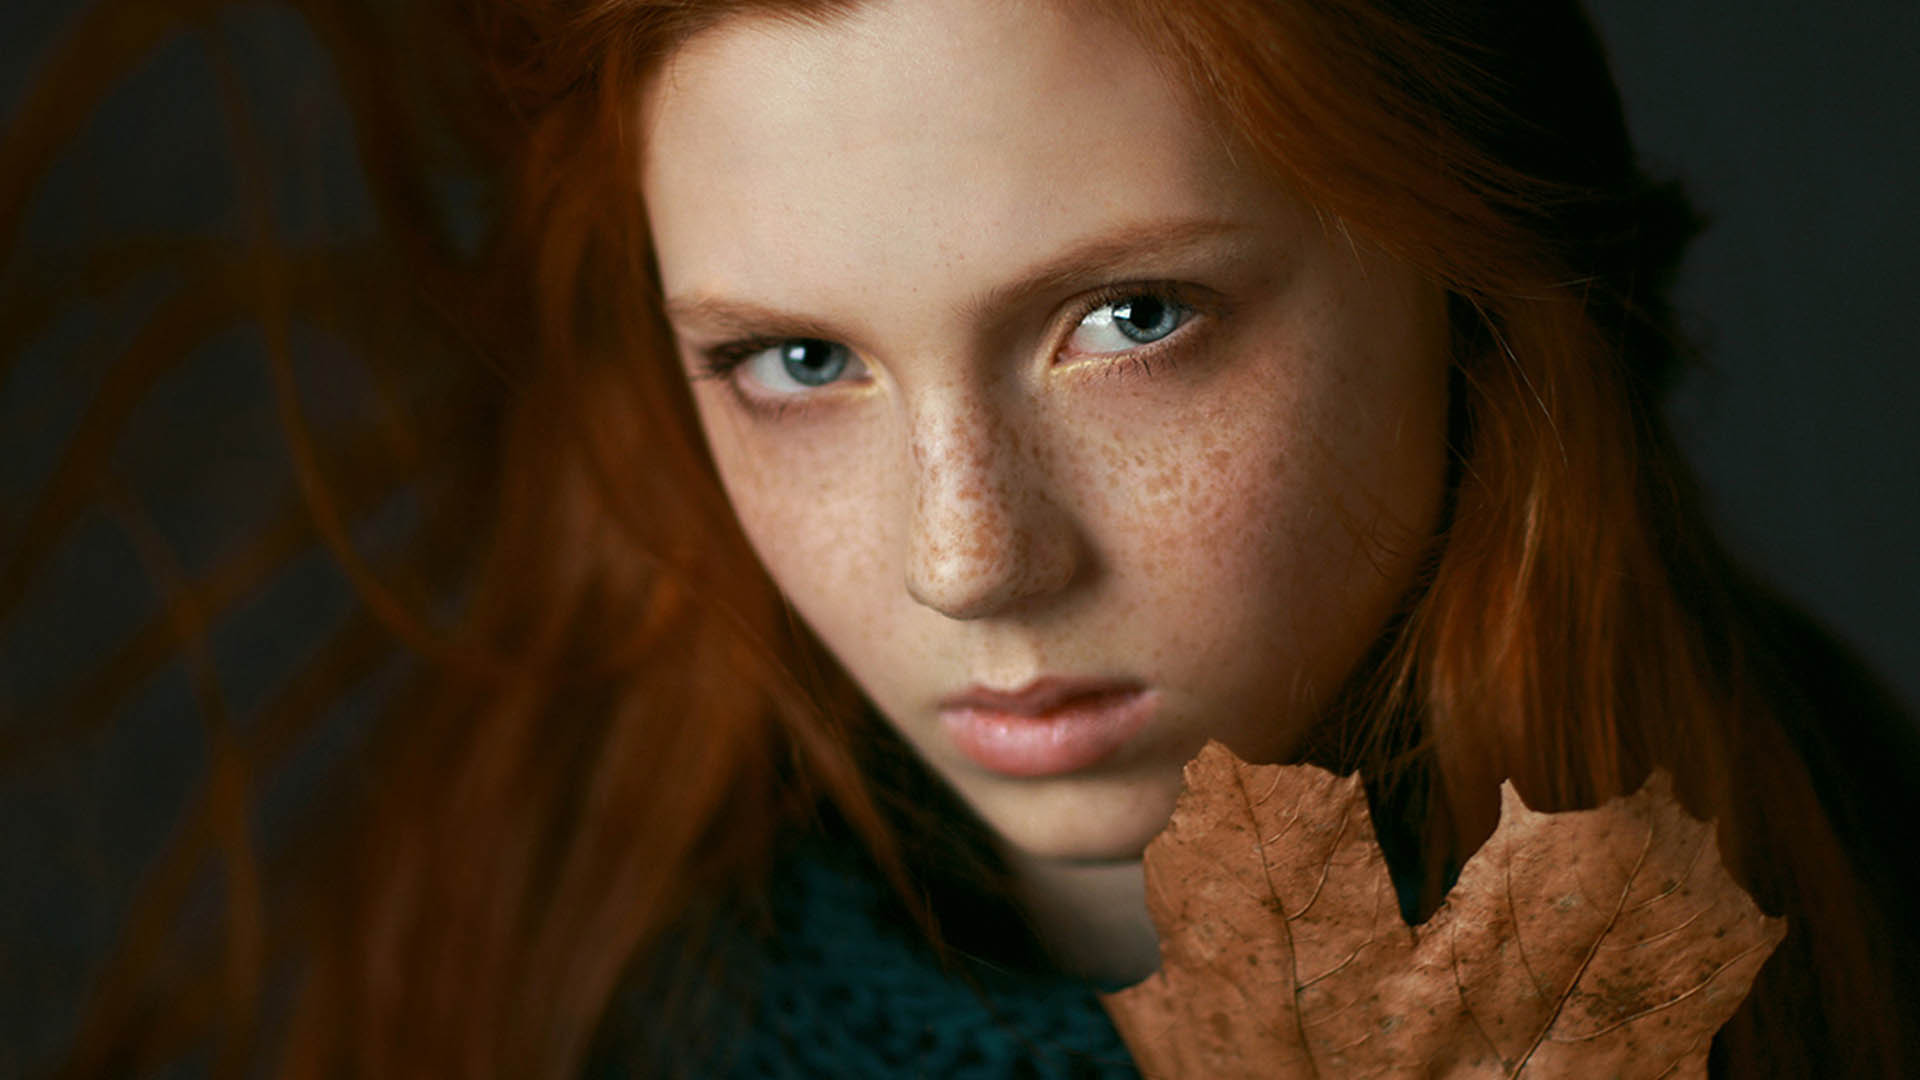 Freckled Girls Wallpapers Images Photos Pictures Backgrounds